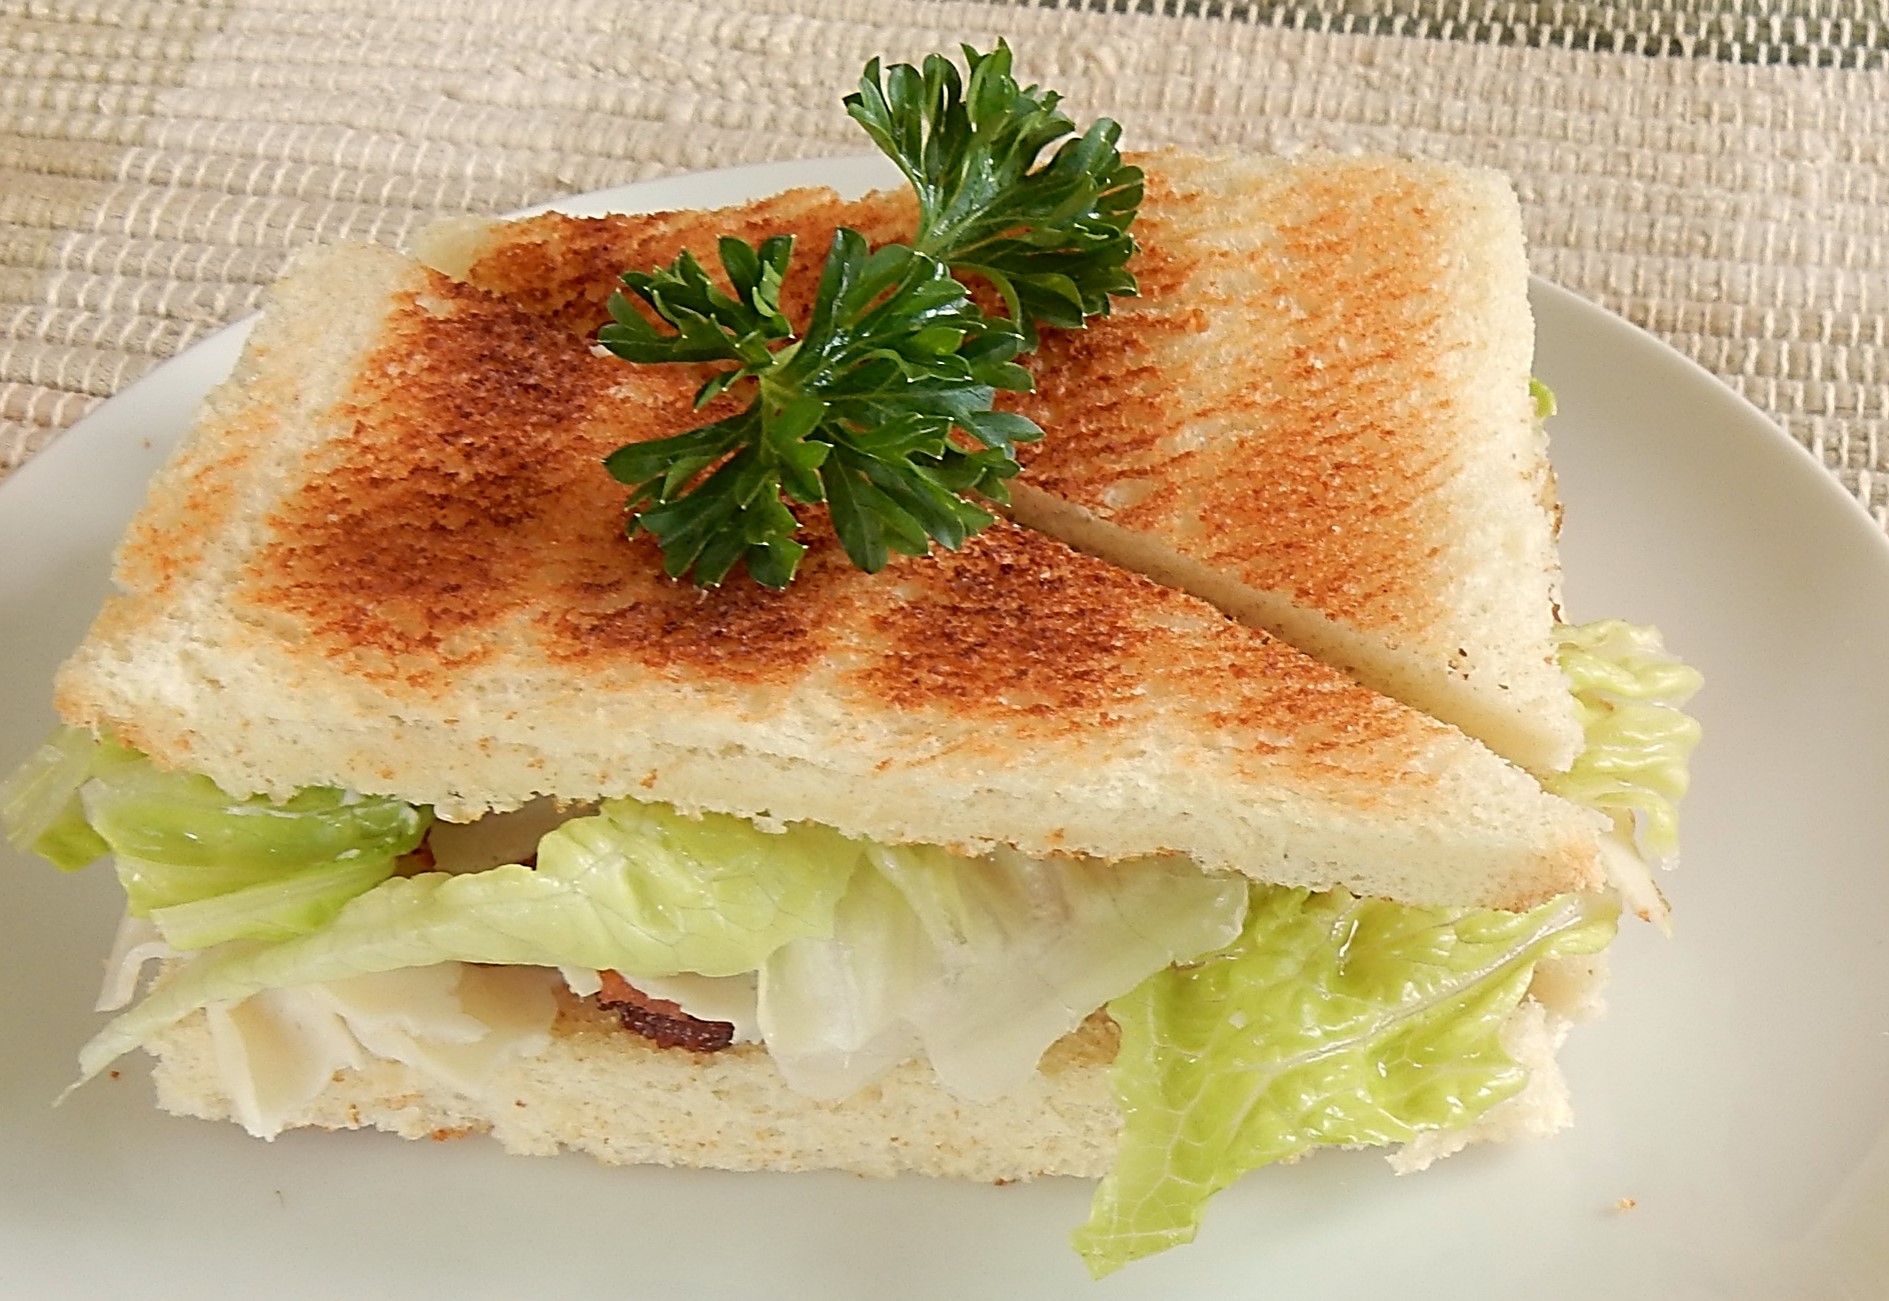 Old-fashioned Club Sandwiches – A Hundred Years Ago